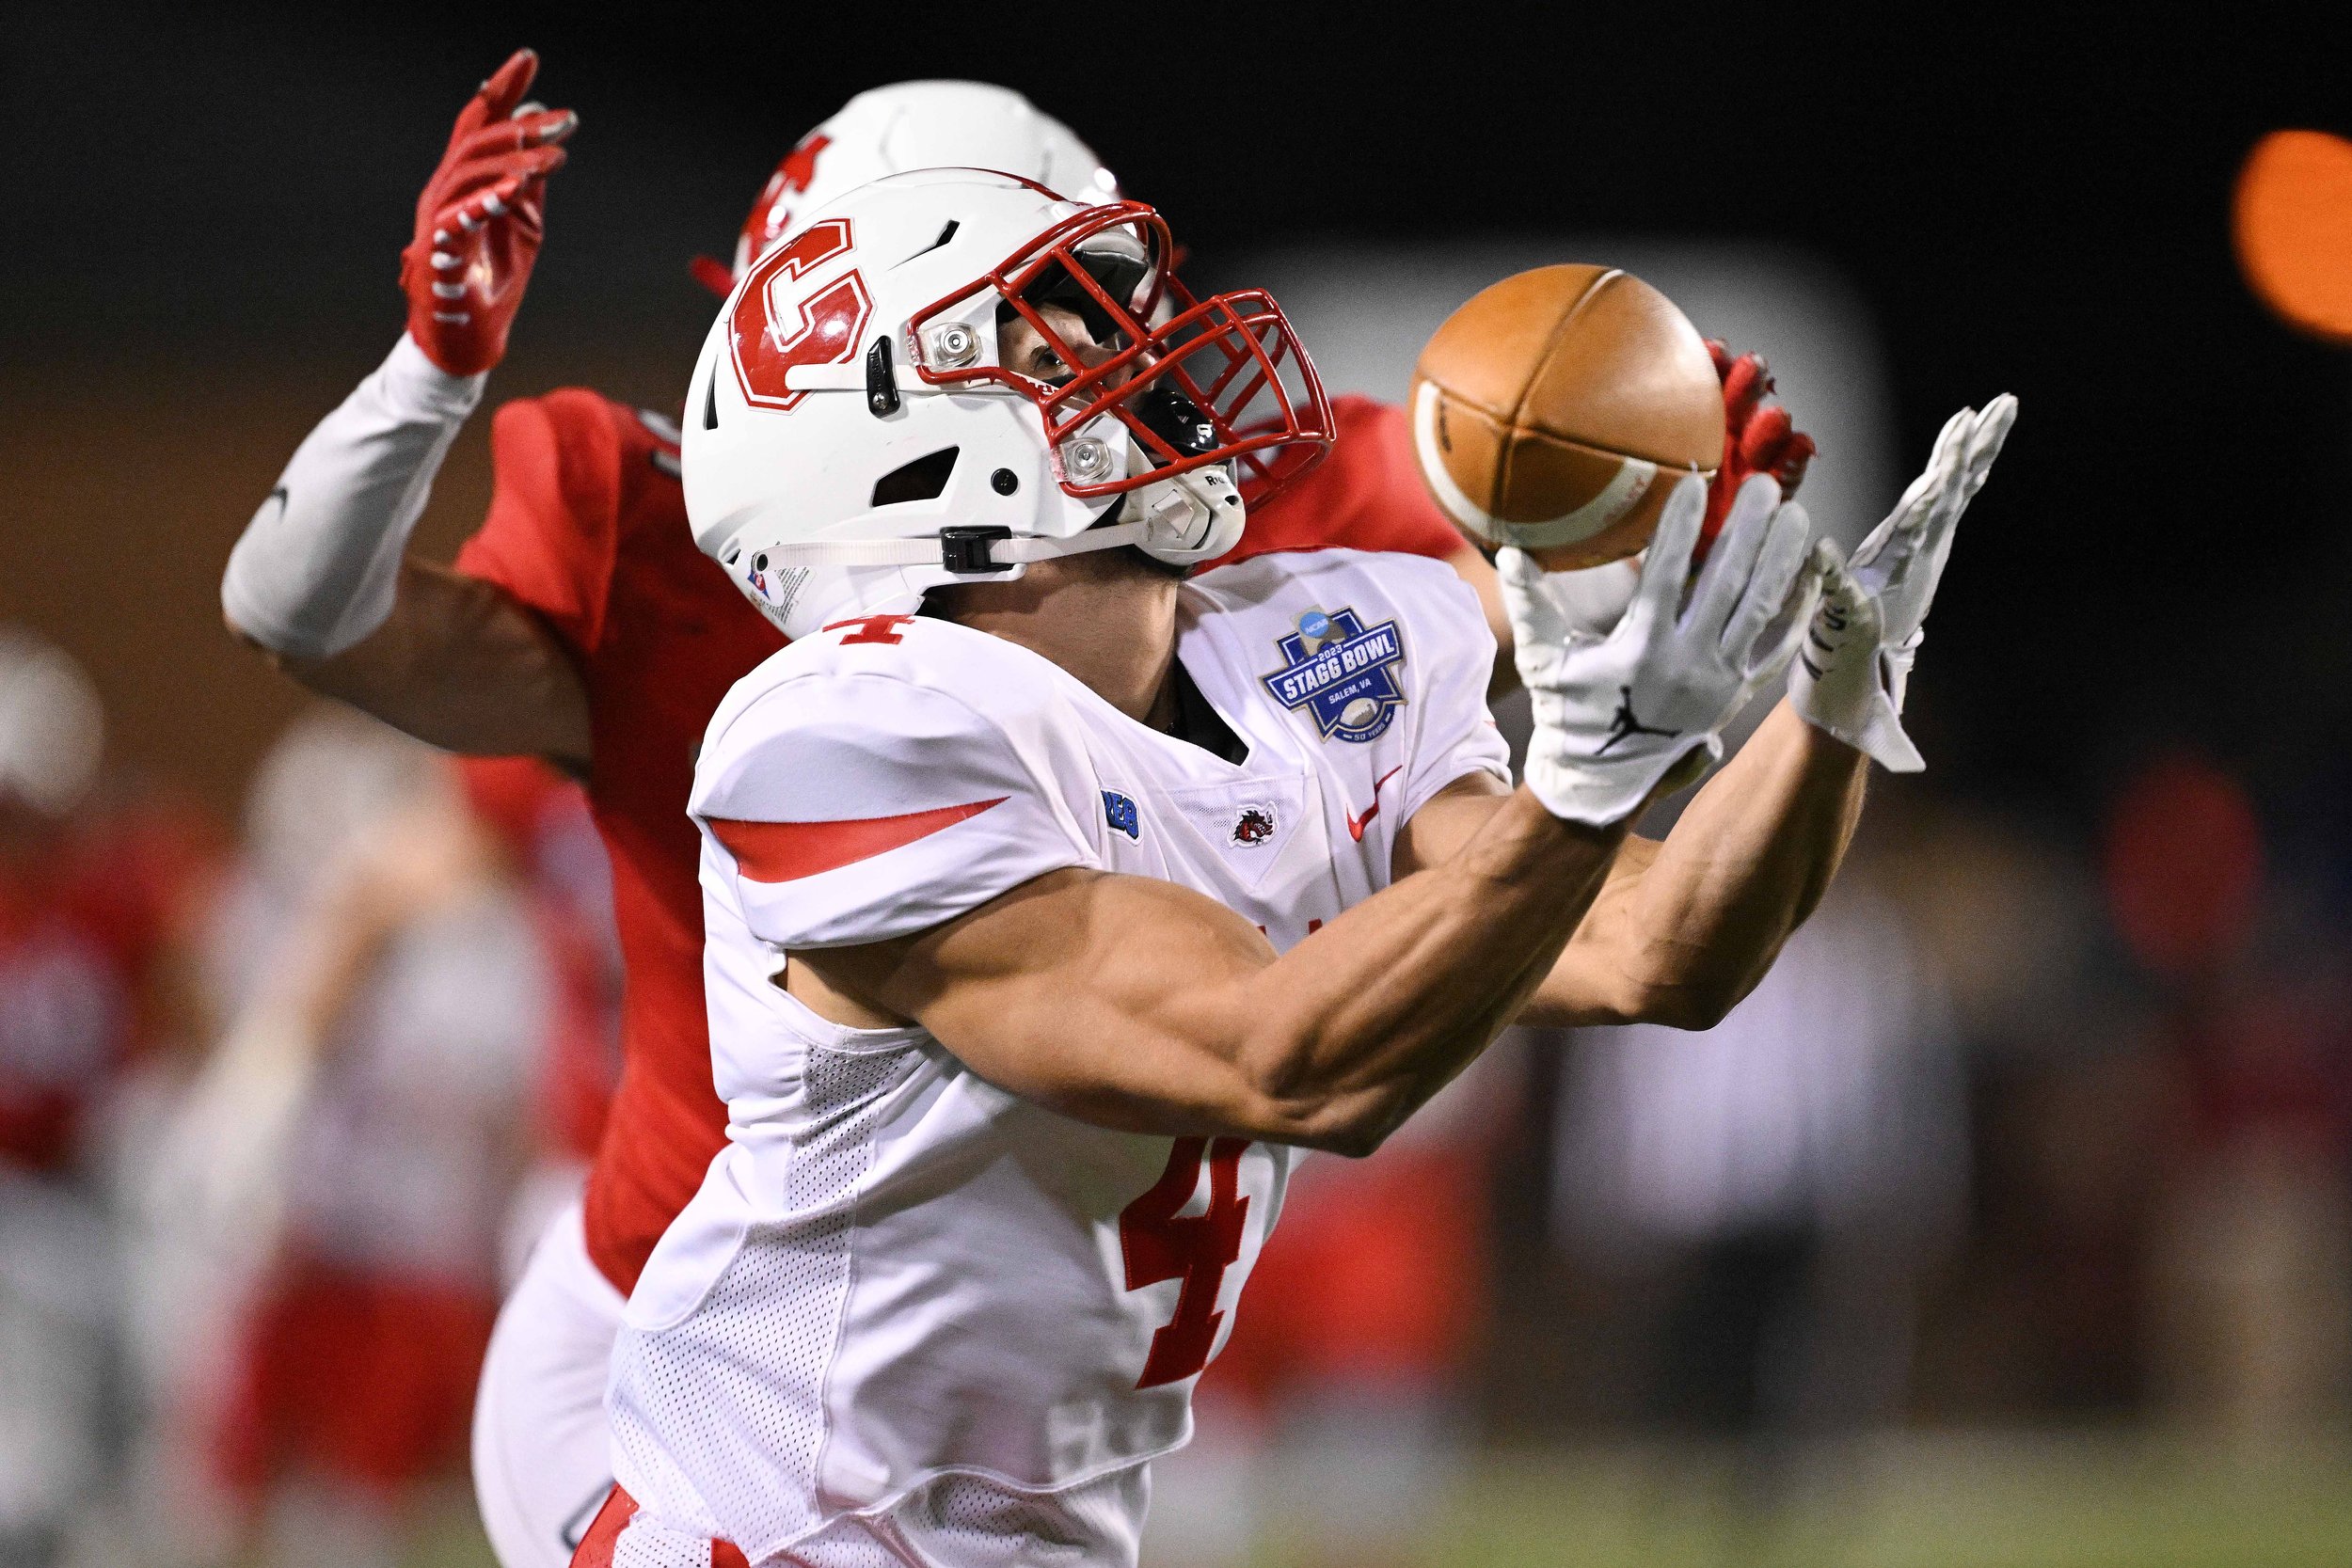  SALEM, VIRGINIA - DECEMBER 15:  Ethan Groark #31 of the North Central Cardinals defends a pass to JJ Laap #4 of the Cortland Red Dragons during the Division III Football Championship held at Salem Stadium on December 15, 2023 in Salem, Virginia. (Ph